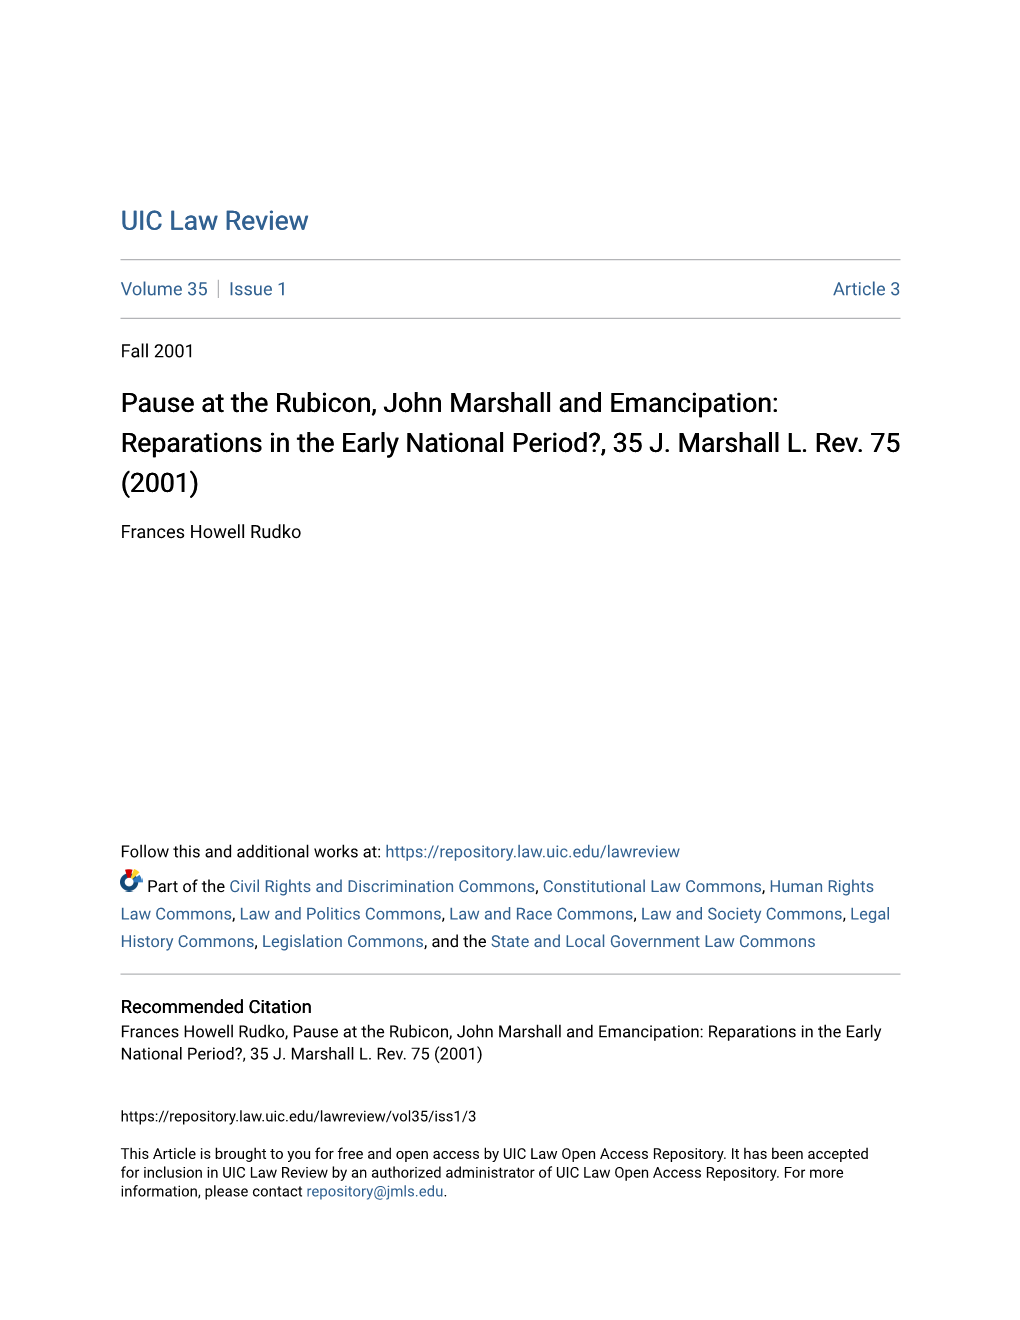 Pause at the Rubicon, John Marshall and Emancipation: Reparations in the Early National Period?, 35 J